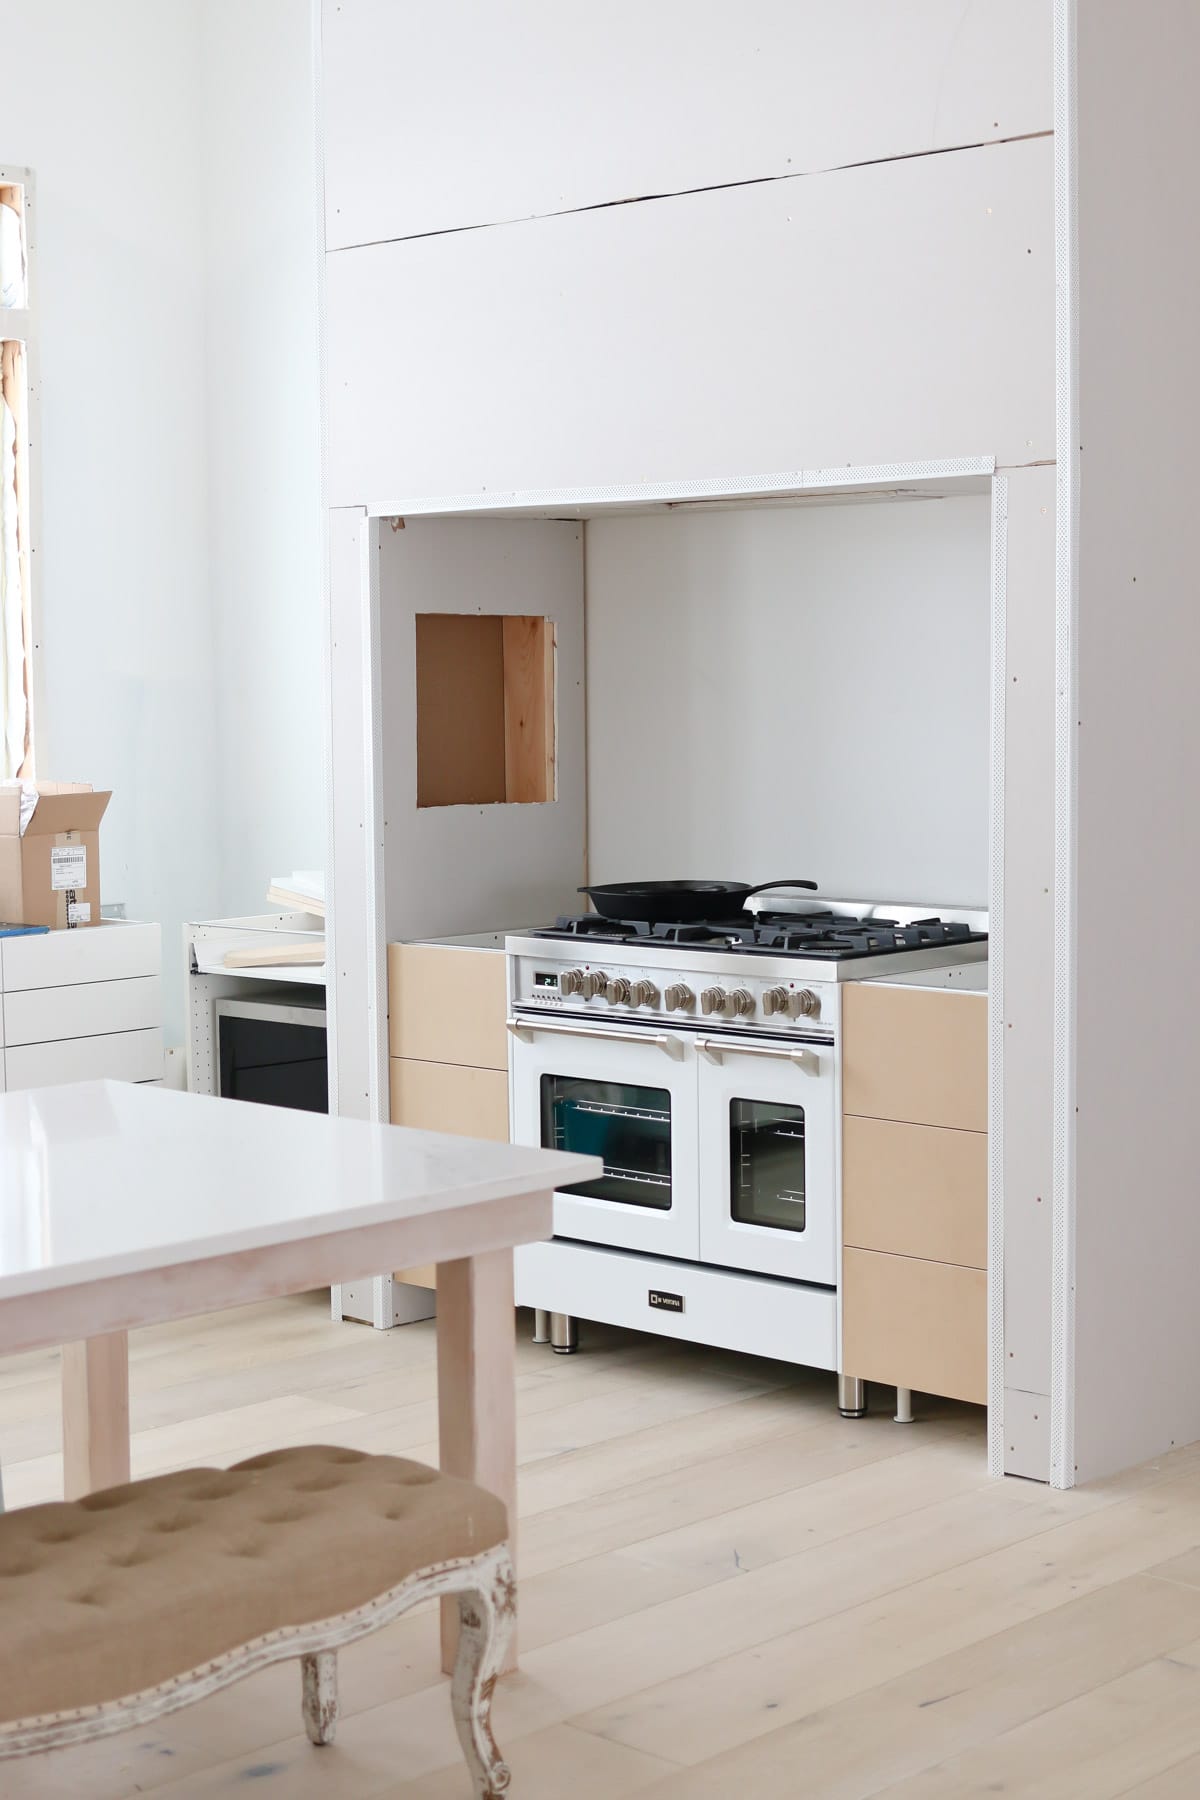 overview of the kitchen stove with brown cabinet storage on each side